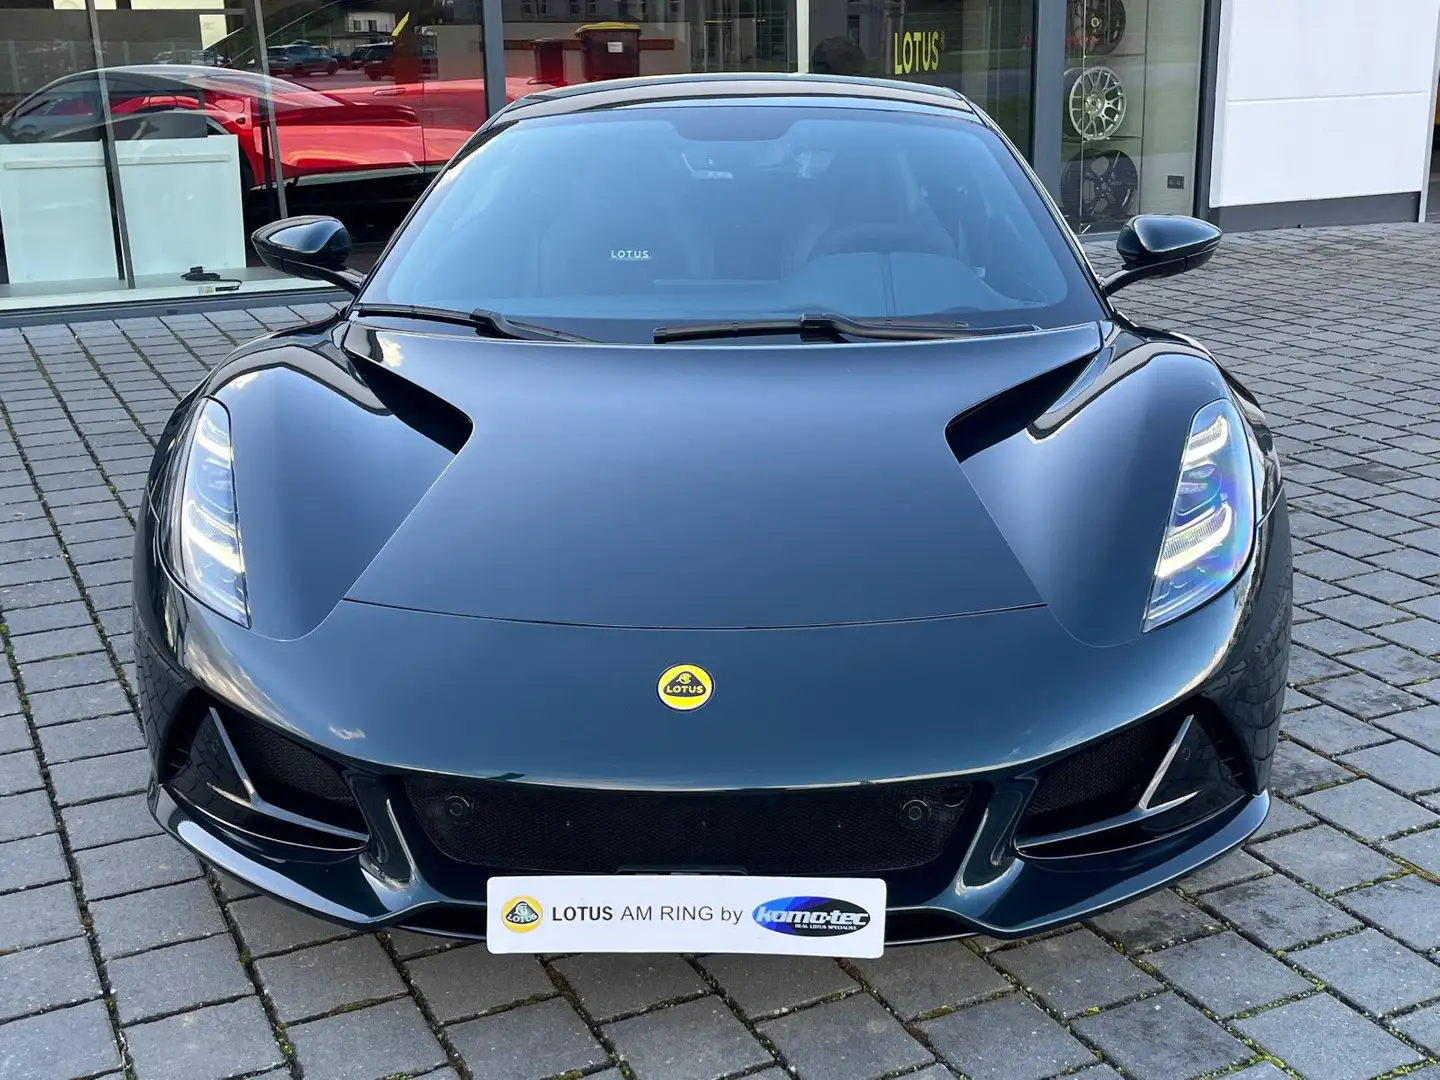 Lotus Emira I4 DCT "First Edition" by Lotus am Ring Zielony - 2